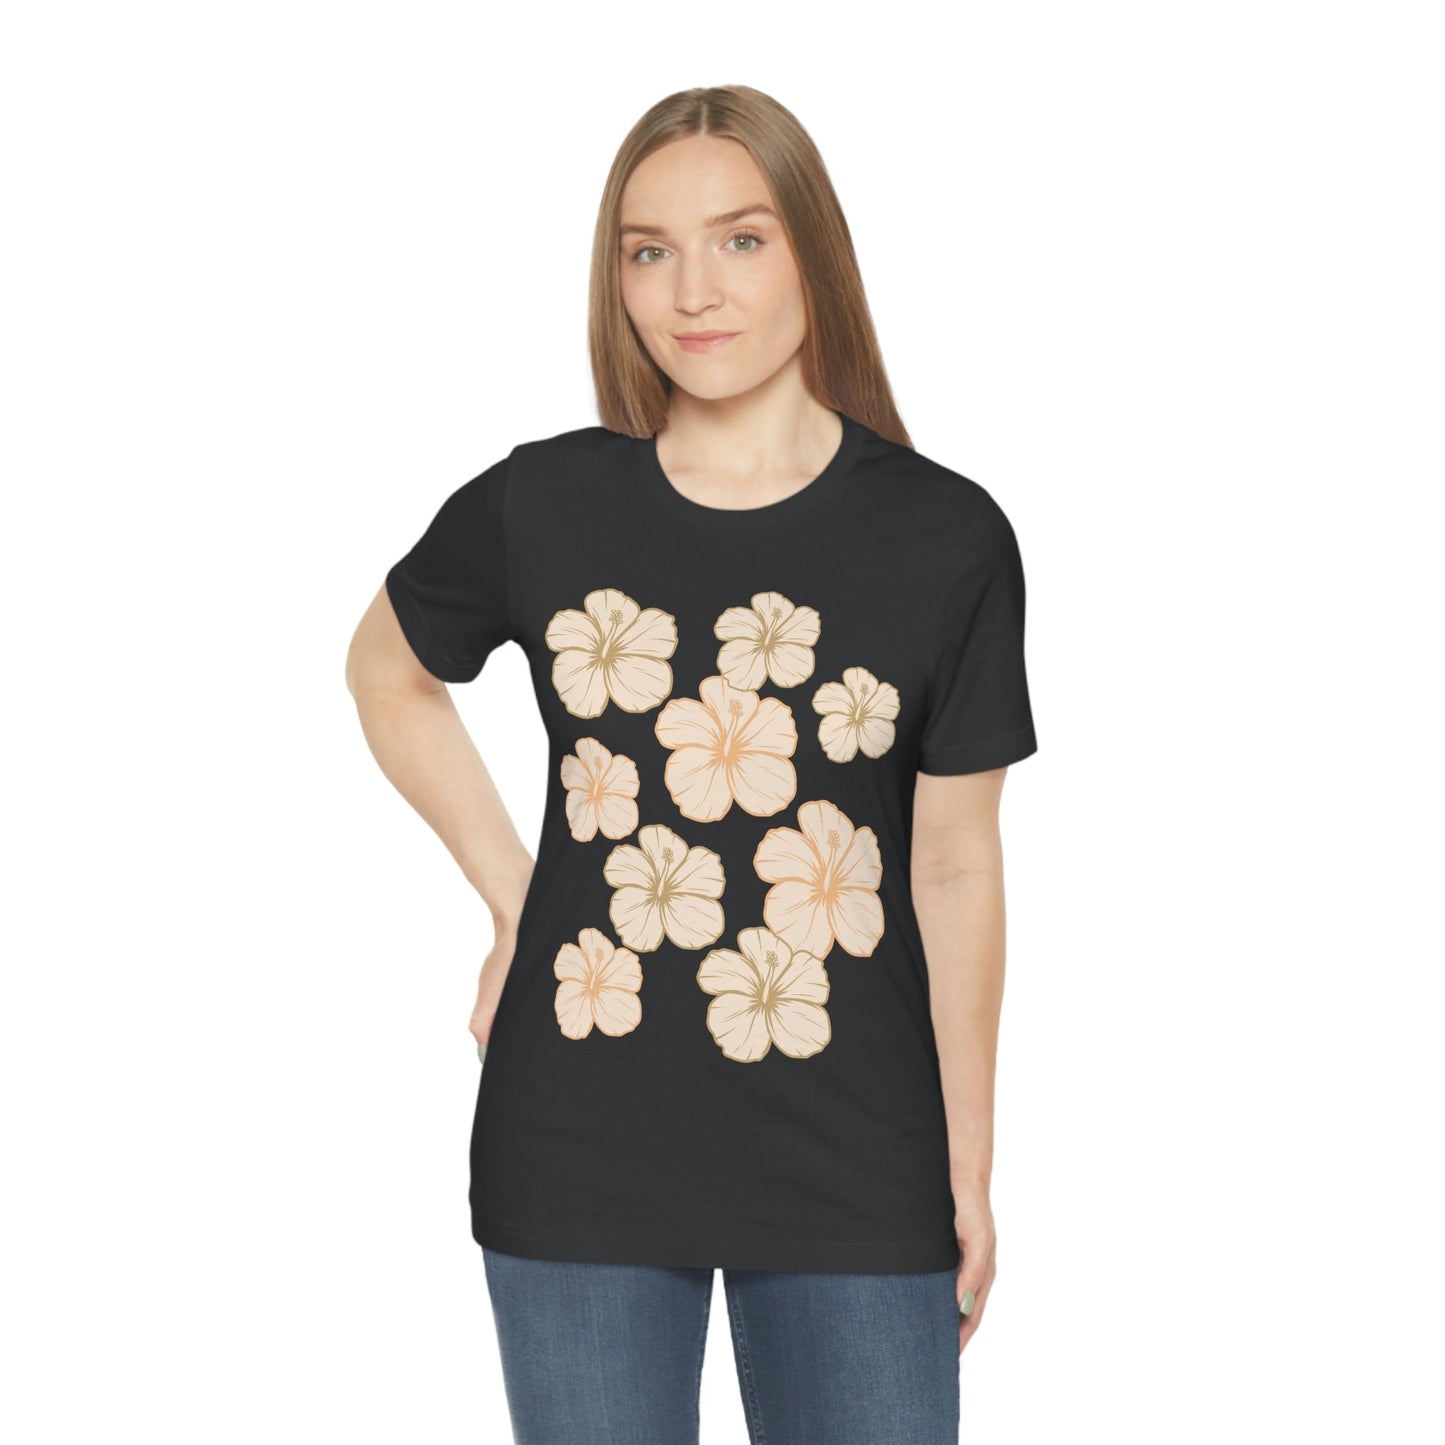 HIbiscus All Over Unisex Jersey Tee - Global Village Kailua Boutique